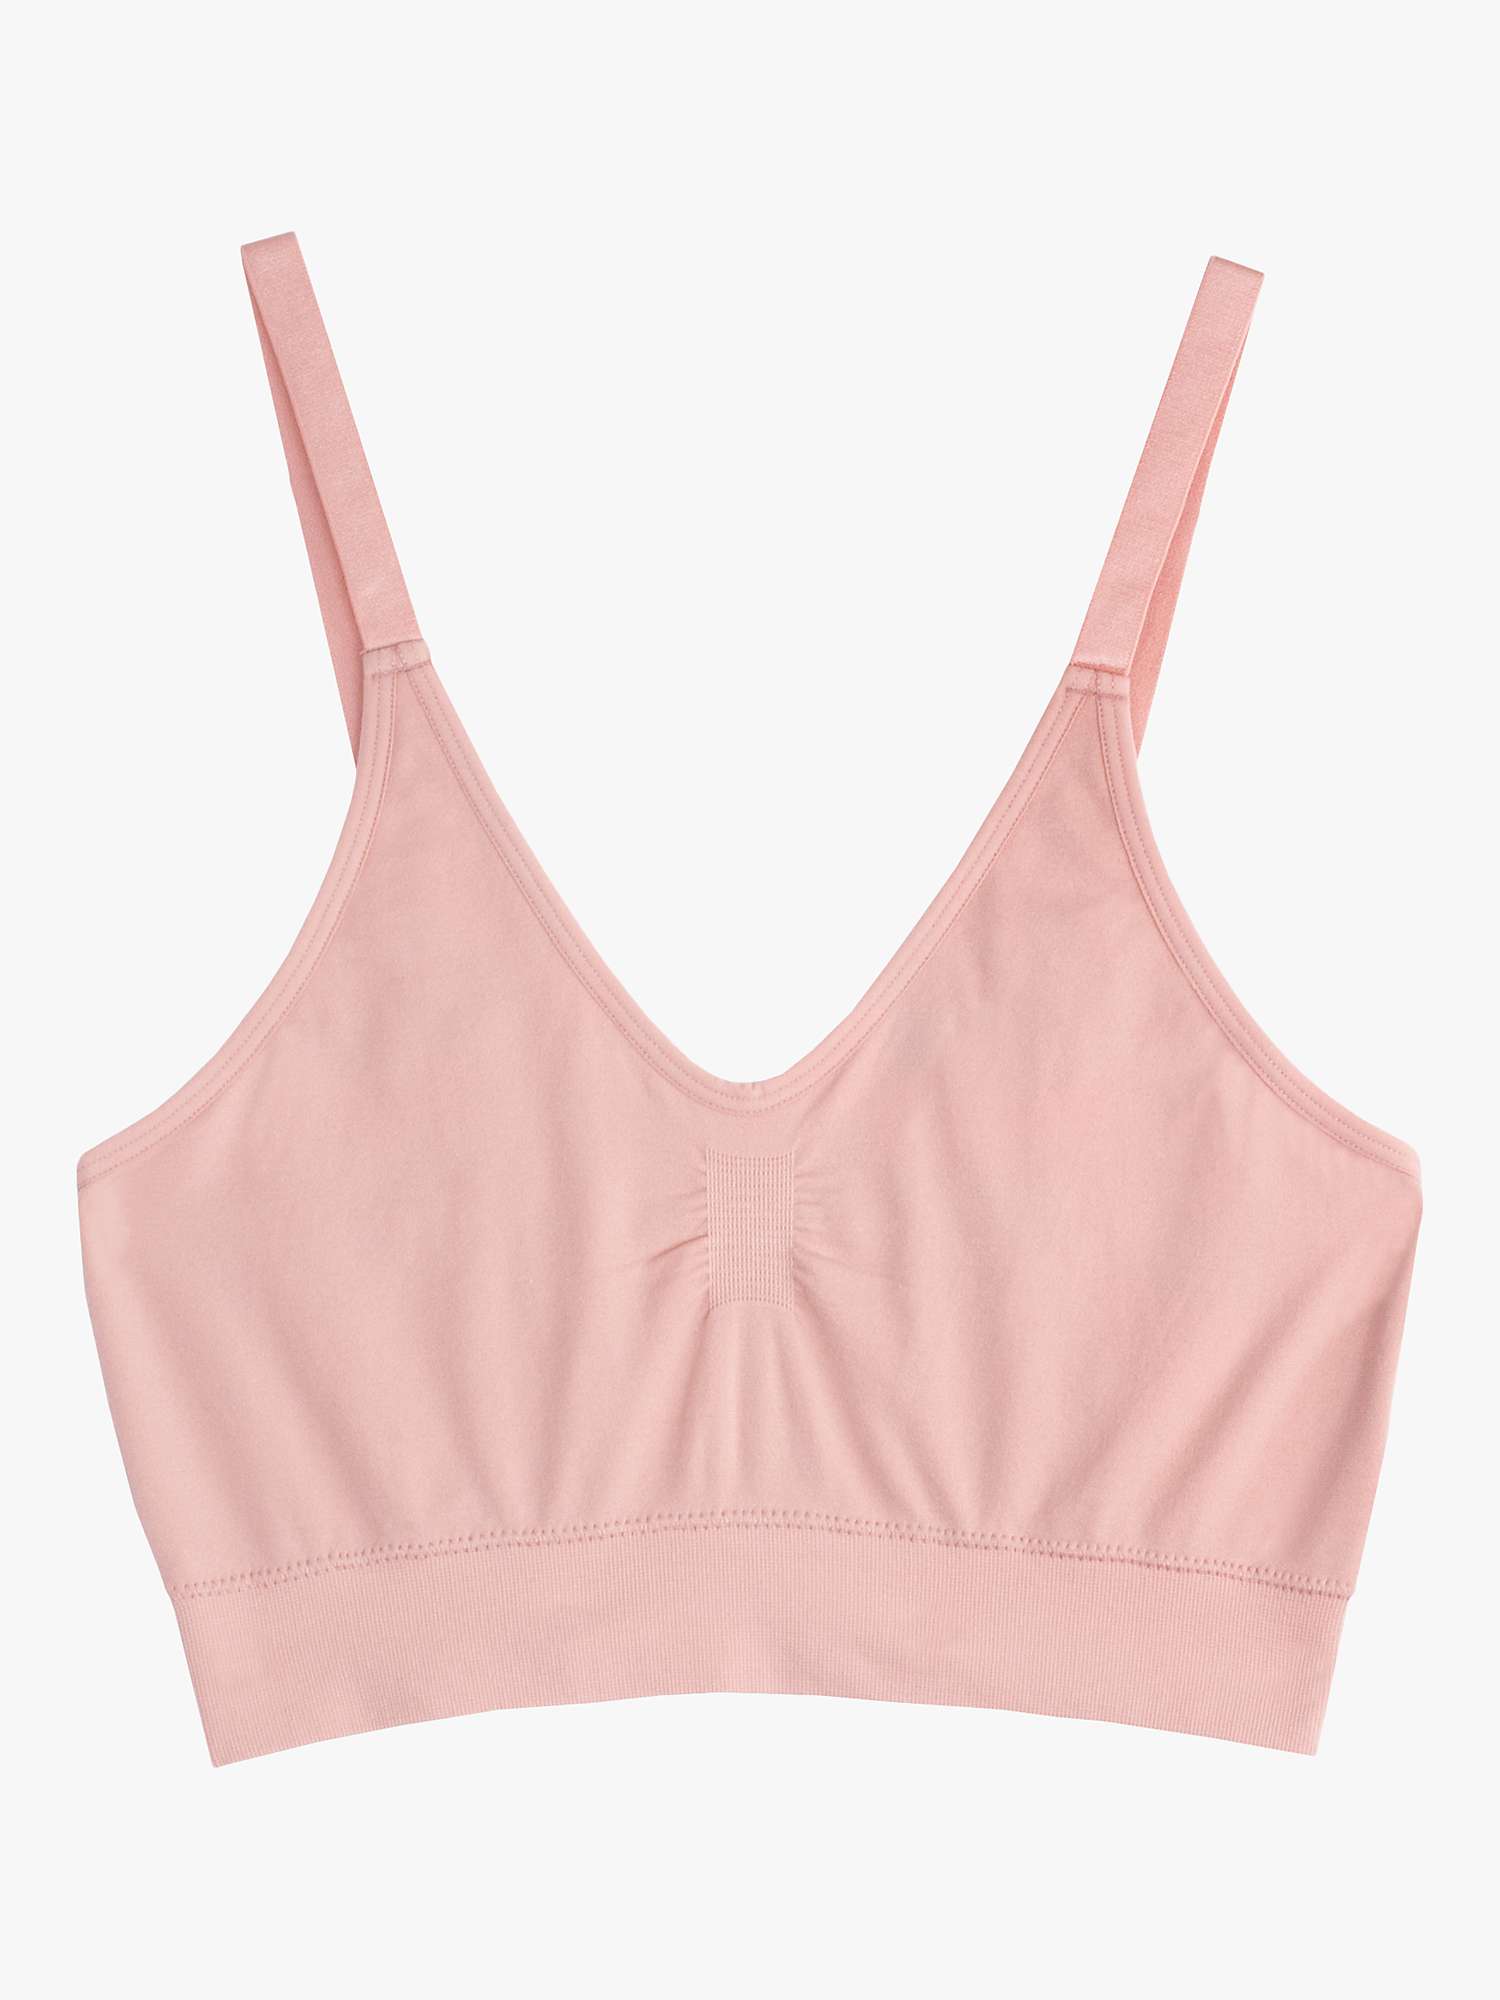 Buy Thought Renata Recycled Nylon Bralette Online at johnlewis.com